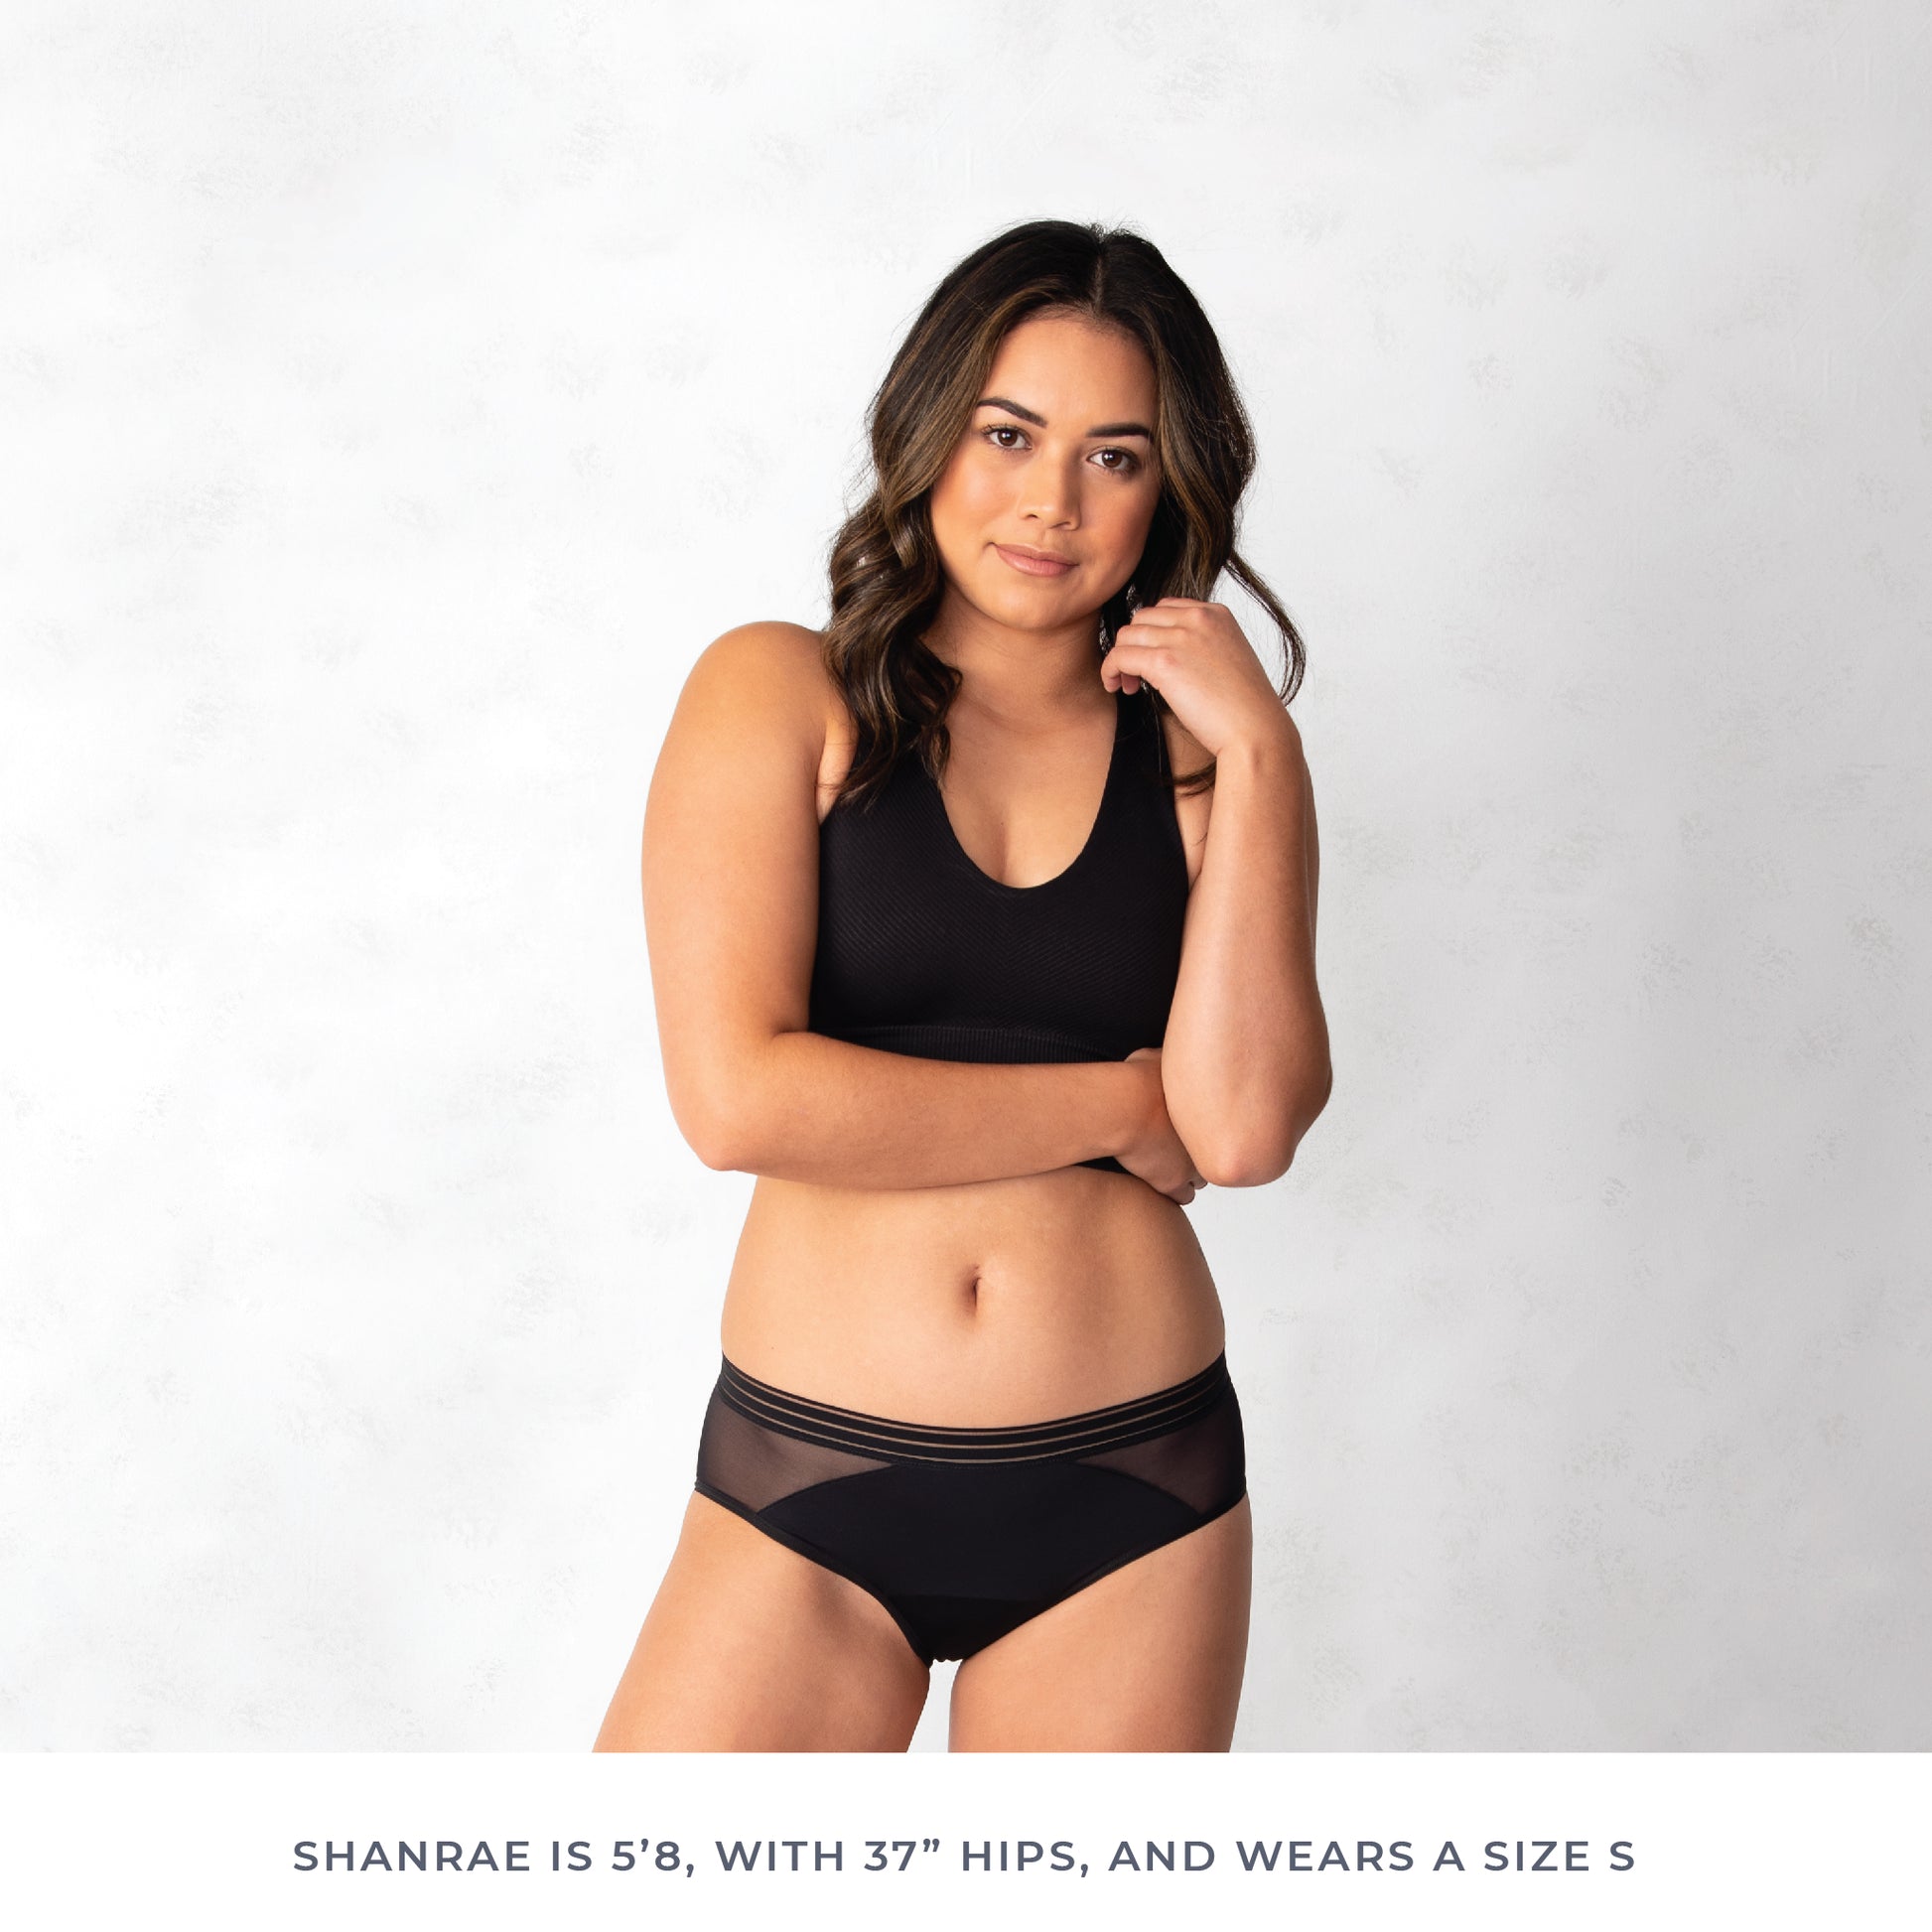 Saalt Reusable Period Underwear - Comfortable, Thin, and Keeps You